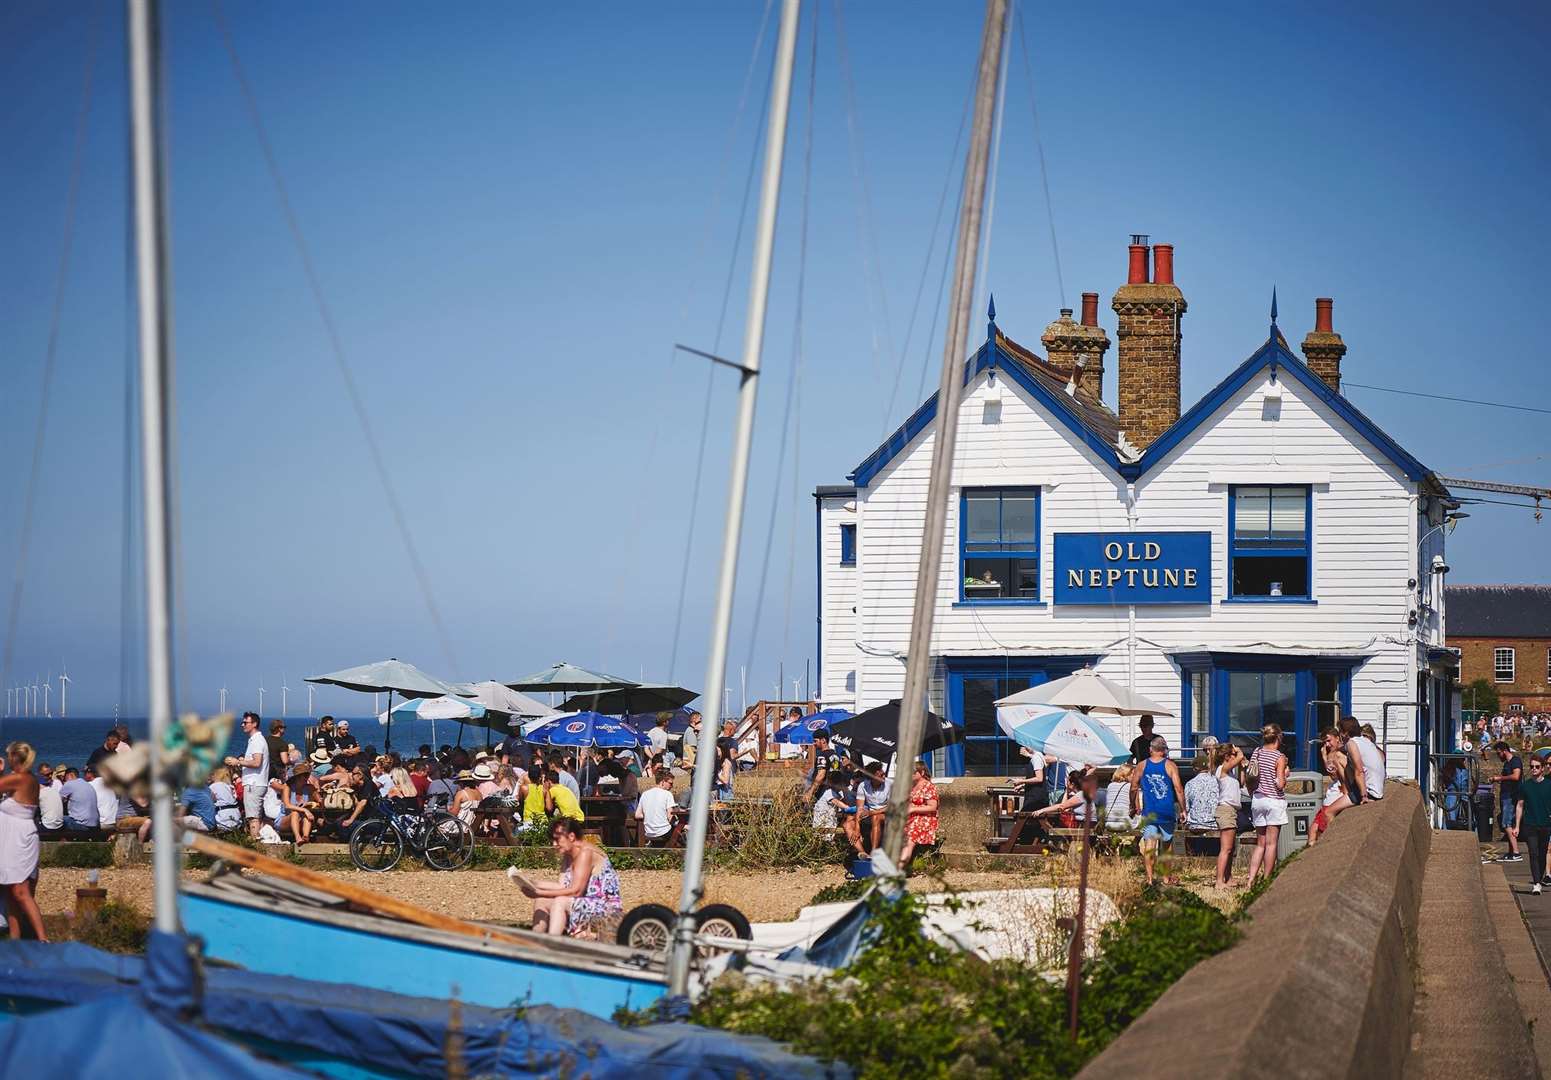 Residents in Whitstable have long complained about the impact the thriving staycation business is having on their livelihoods. Picture: iStock